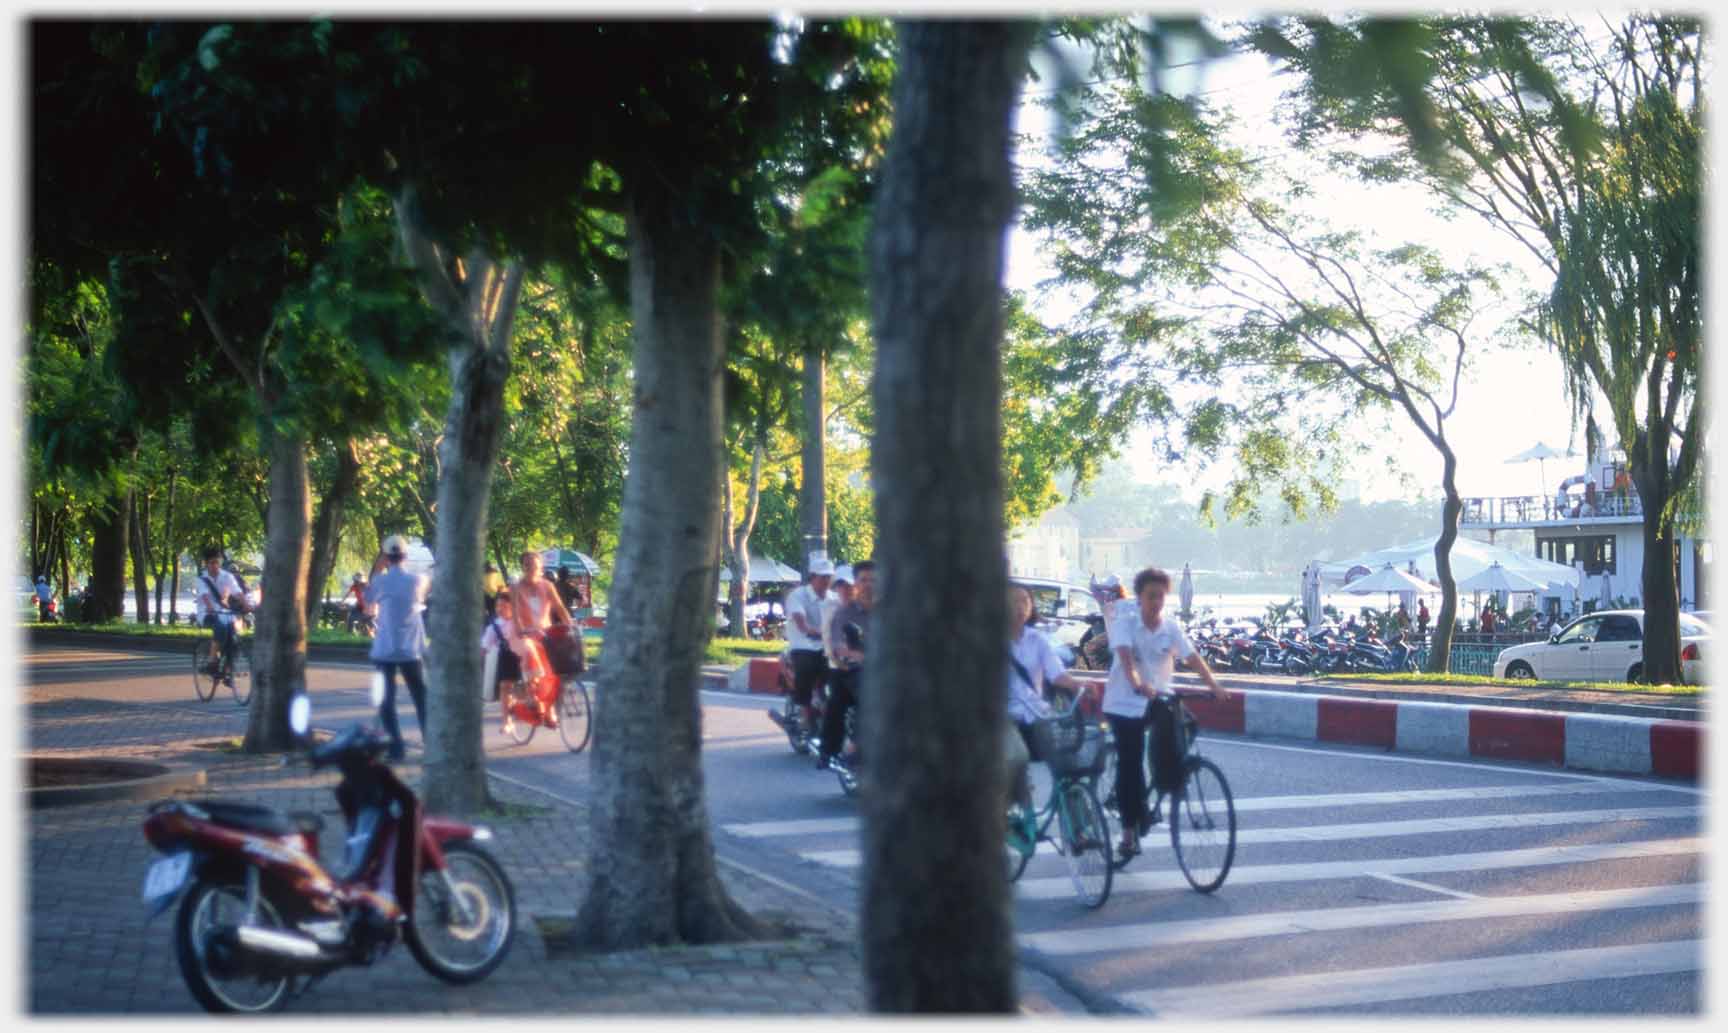 Bicycles on raoadway through trees.